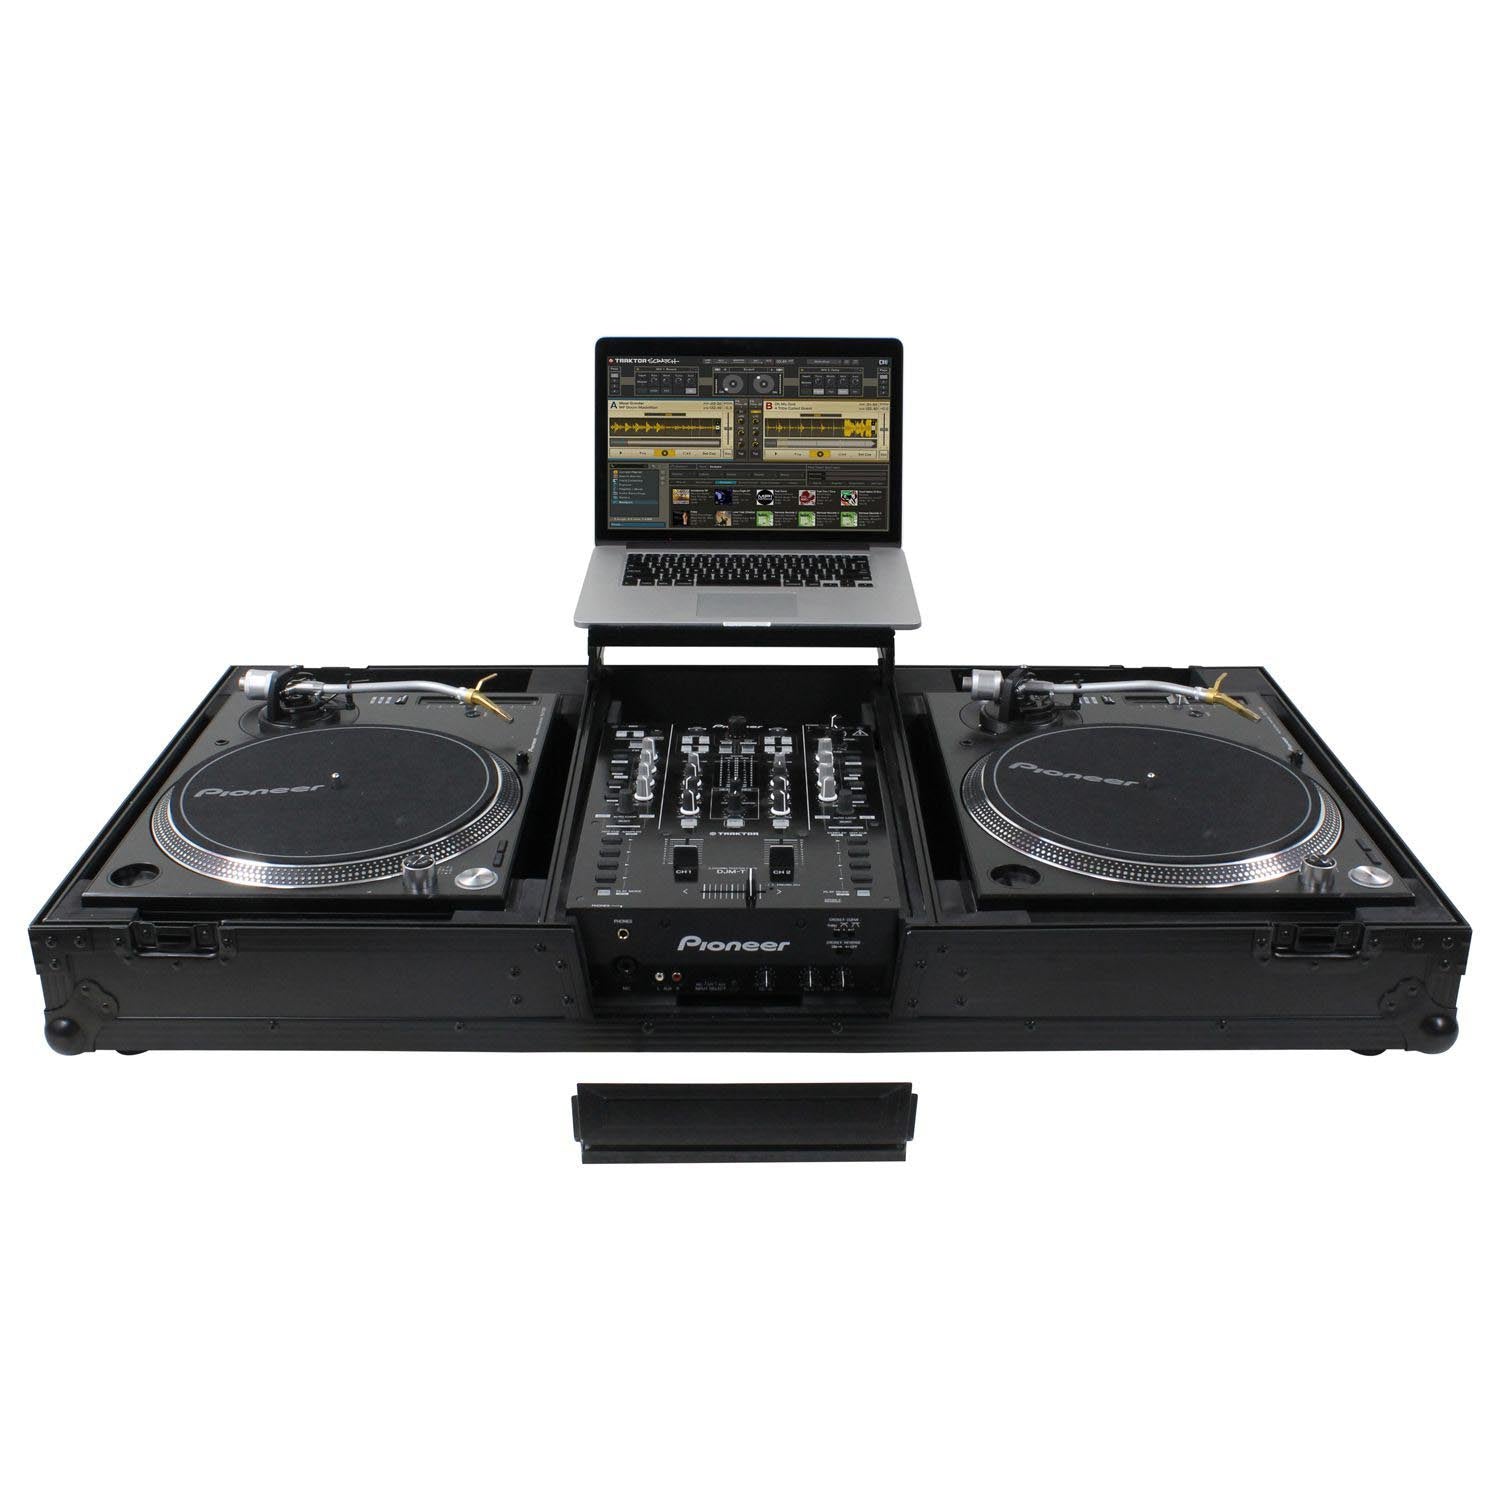 Odyssey FZGSLBM10WRBL Black Low Profile 10″ Format DJ Mixer and Two Battle Position Turntables Flight Coffin Case with Wheels and Glide Platform - Hollywood DJ